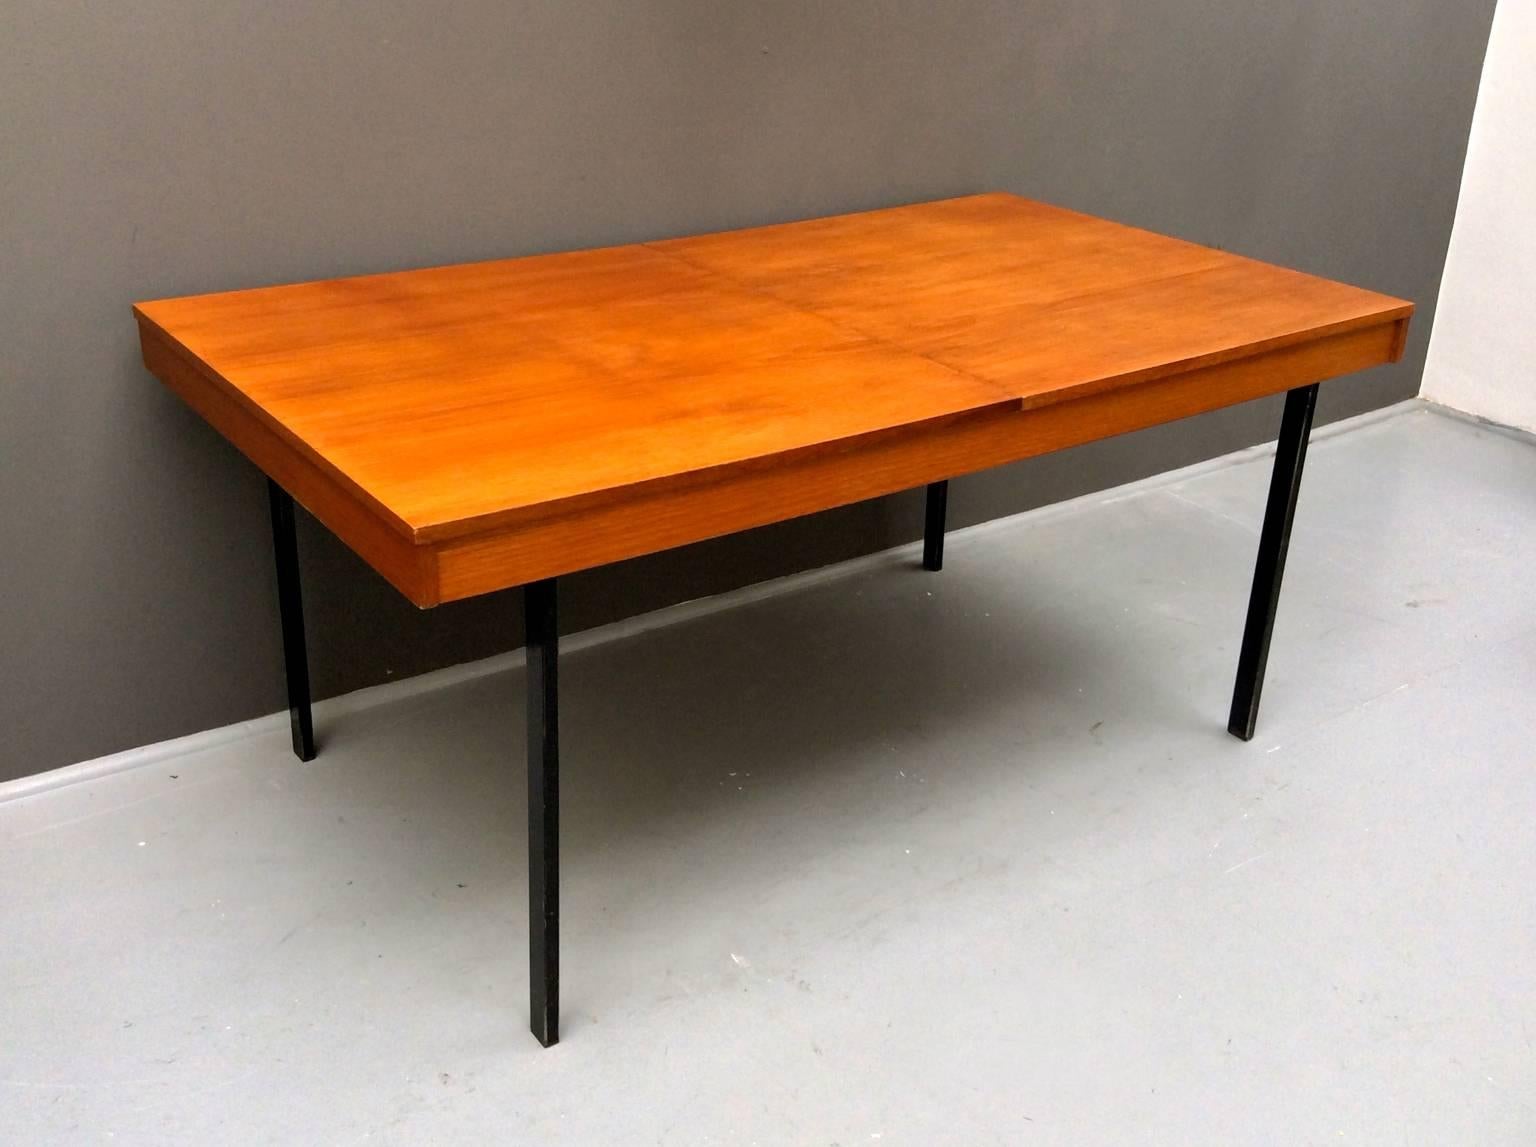 Modernist dining table by the French designer and architect Pierre Guariche for the Belgian manufacturer, Meurop, 1950s.

The simple and elegant design is finished in teak with rectangular steel legs finished in black lacquer. The tabletop divides